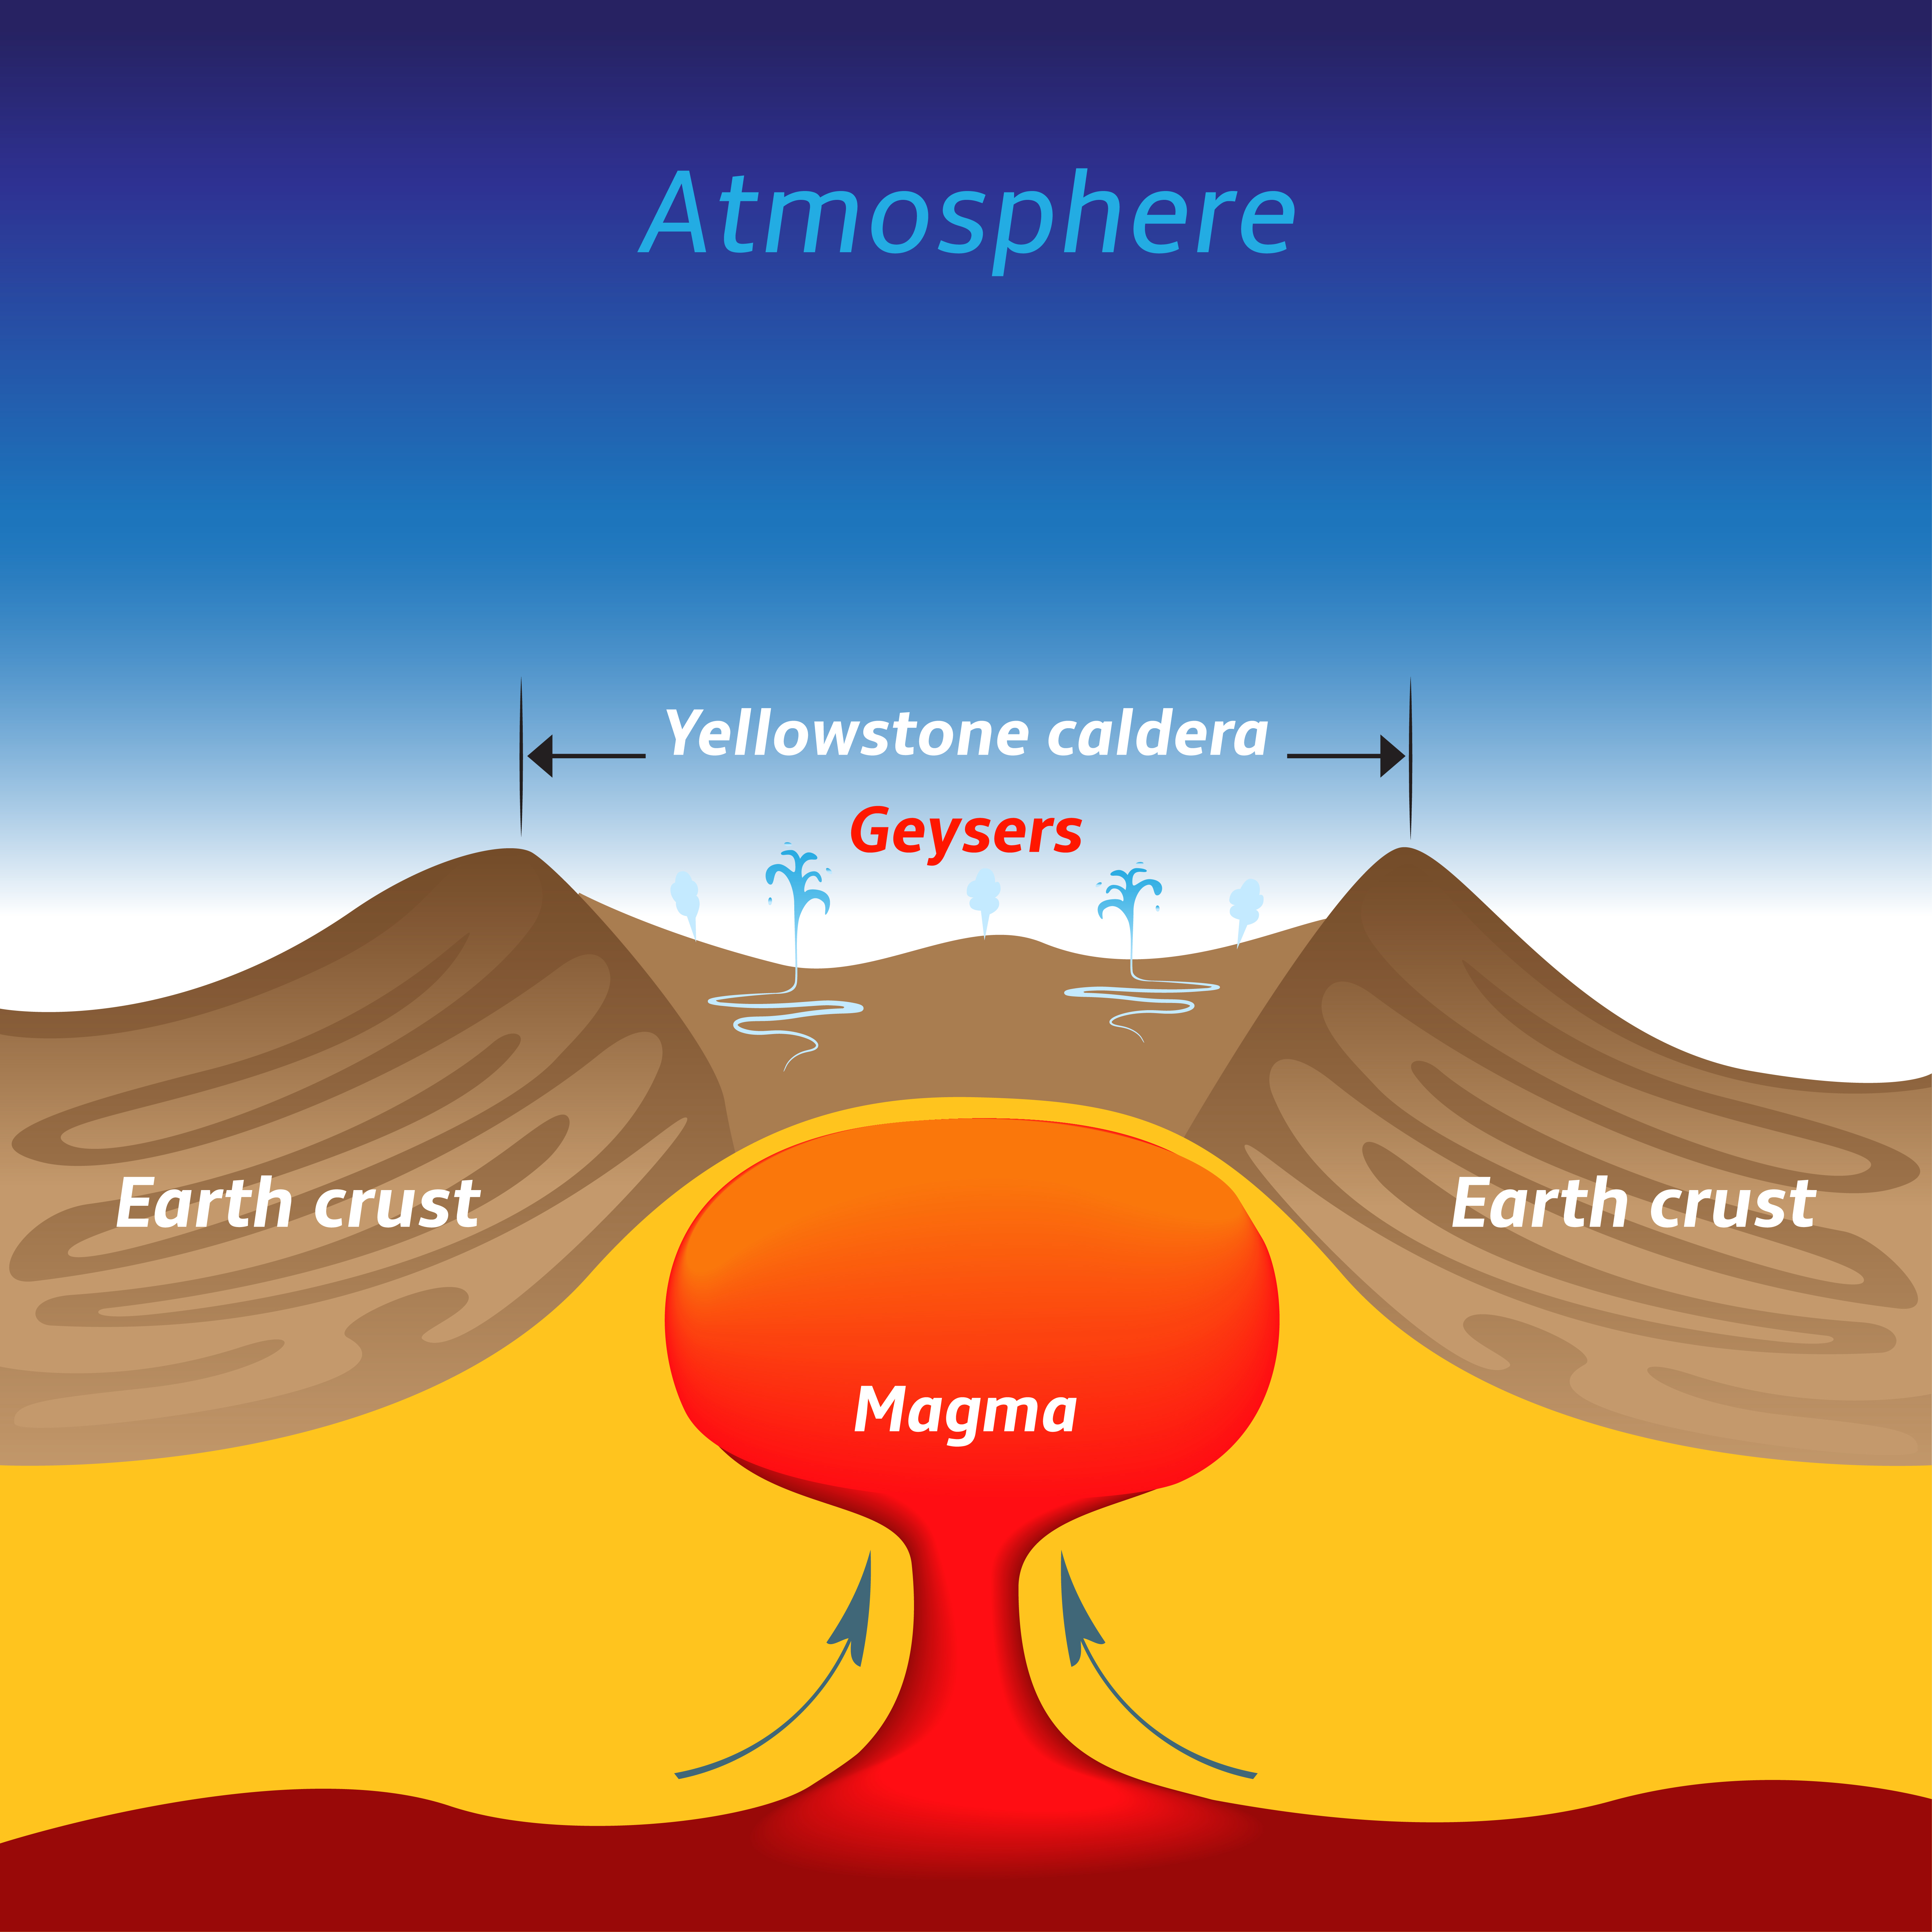 A rough illustration of the Yellowstone caldera and what can be found beneath.